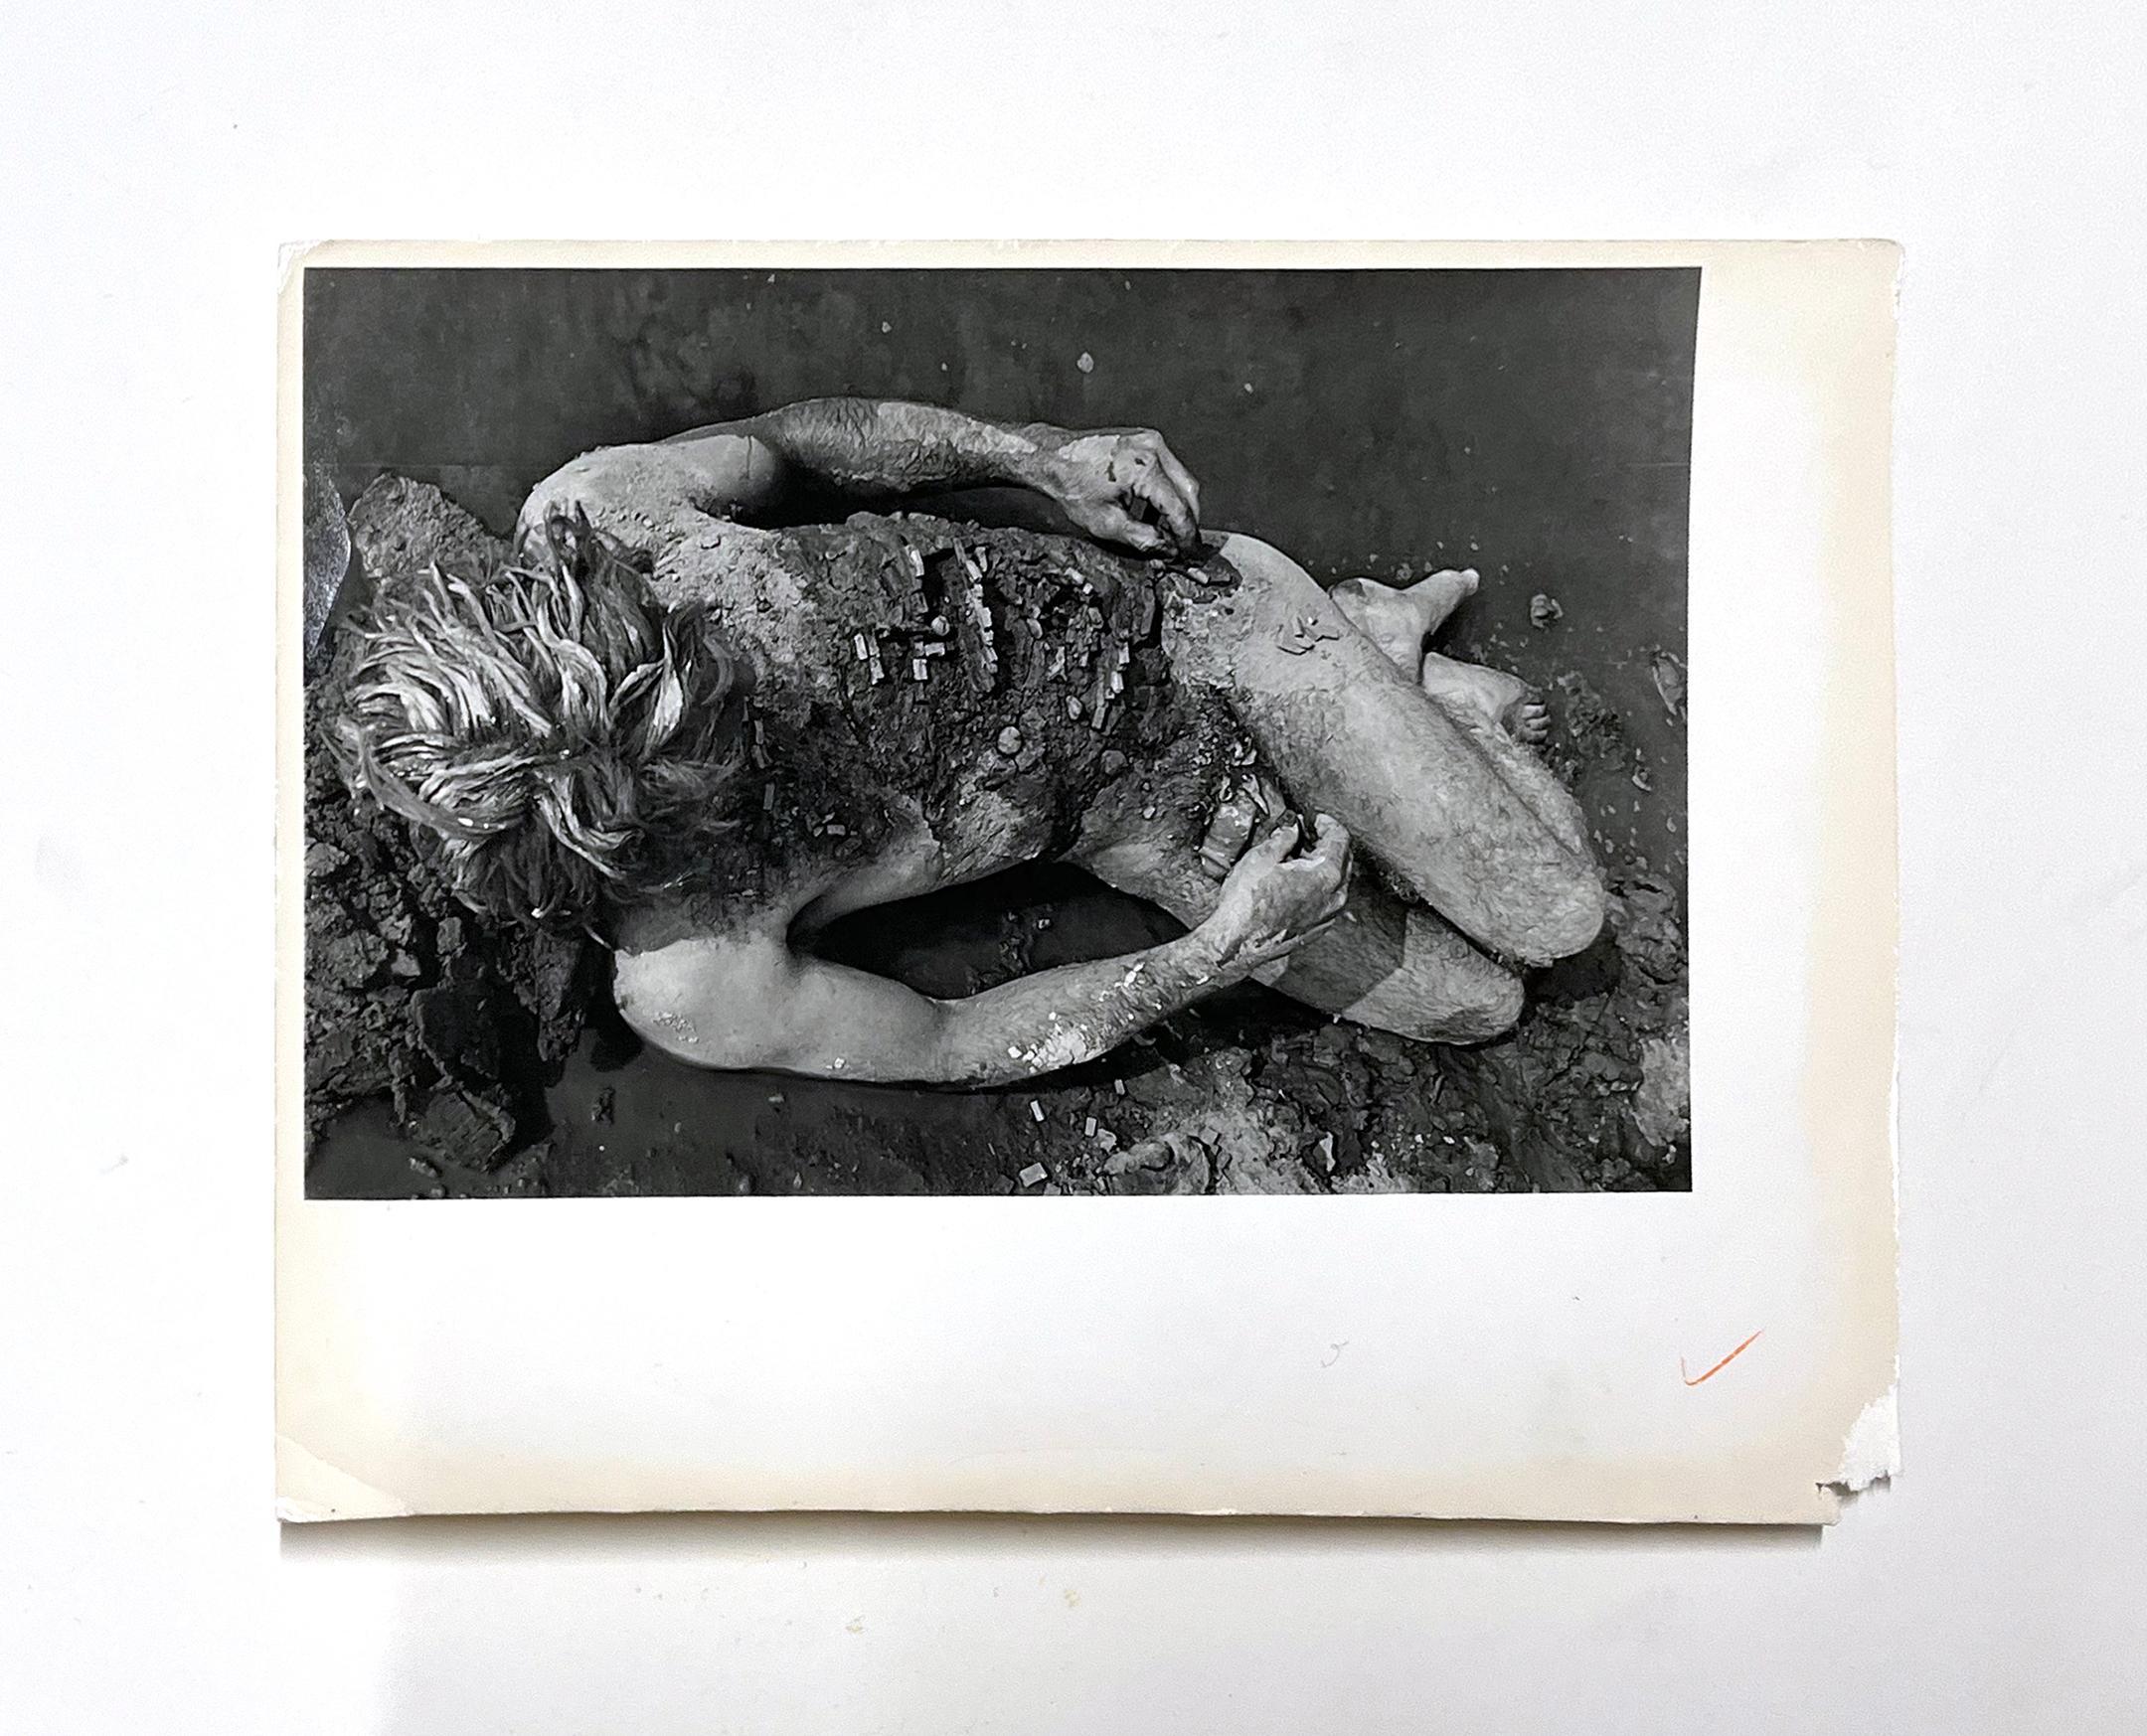 Charles Simonds Original Gelatin Silver Print from the archive of Leo Castelli from 1993. Simond's exhibition "Landscape - Body - Dwelling" 

Charles Simonds is an American contemporary artist and sculptor based in New York.[1] He is best known for